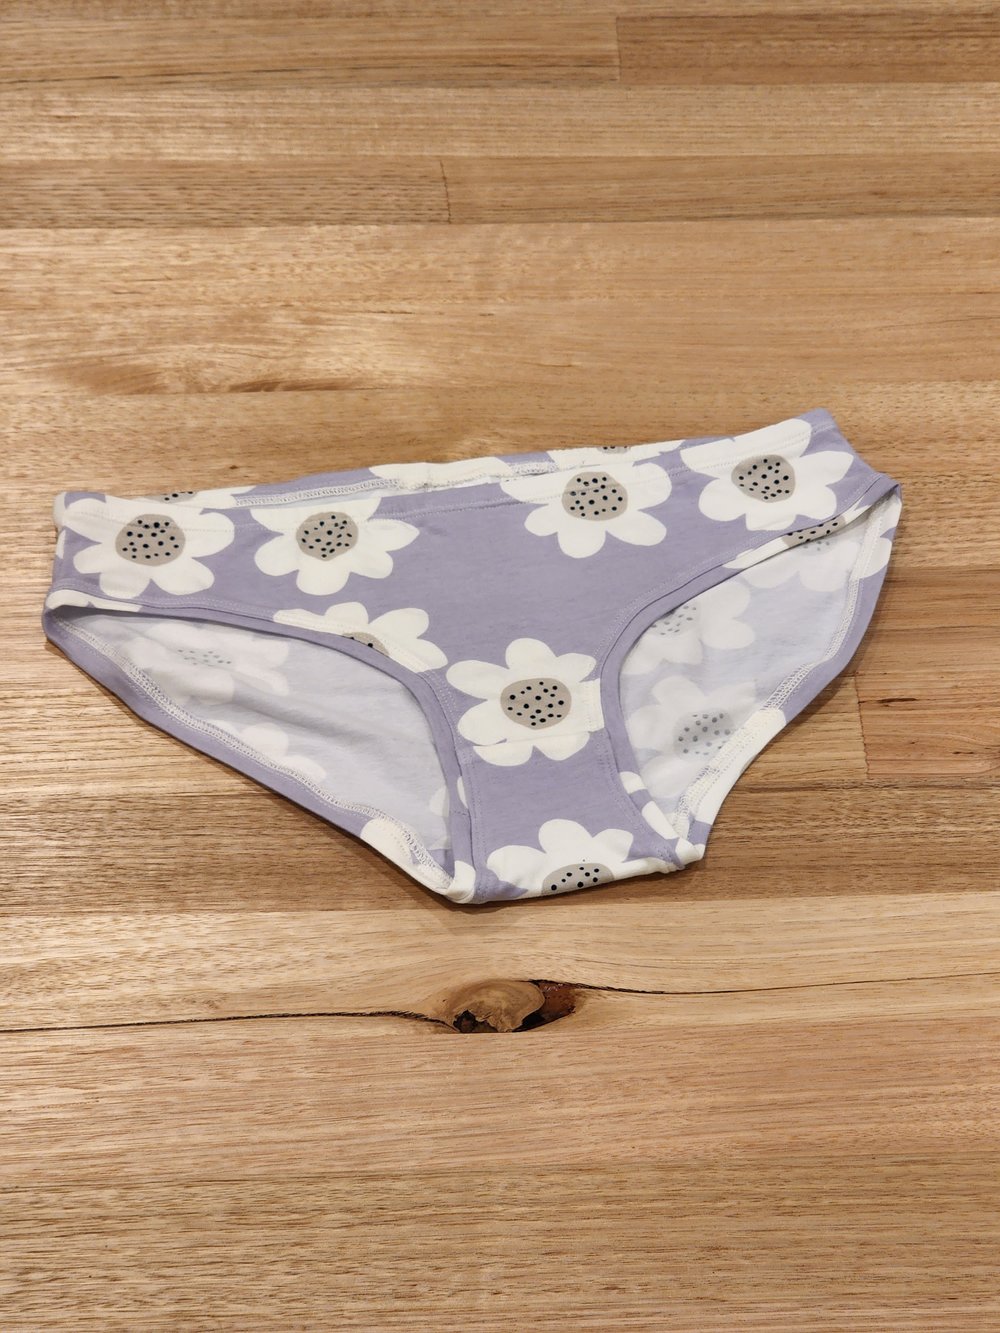 Australian Womens Organic Cotton Underwear Daisies Hand Made in Melbourne -  Hipsters - Plus Size — by Audrey & Grace